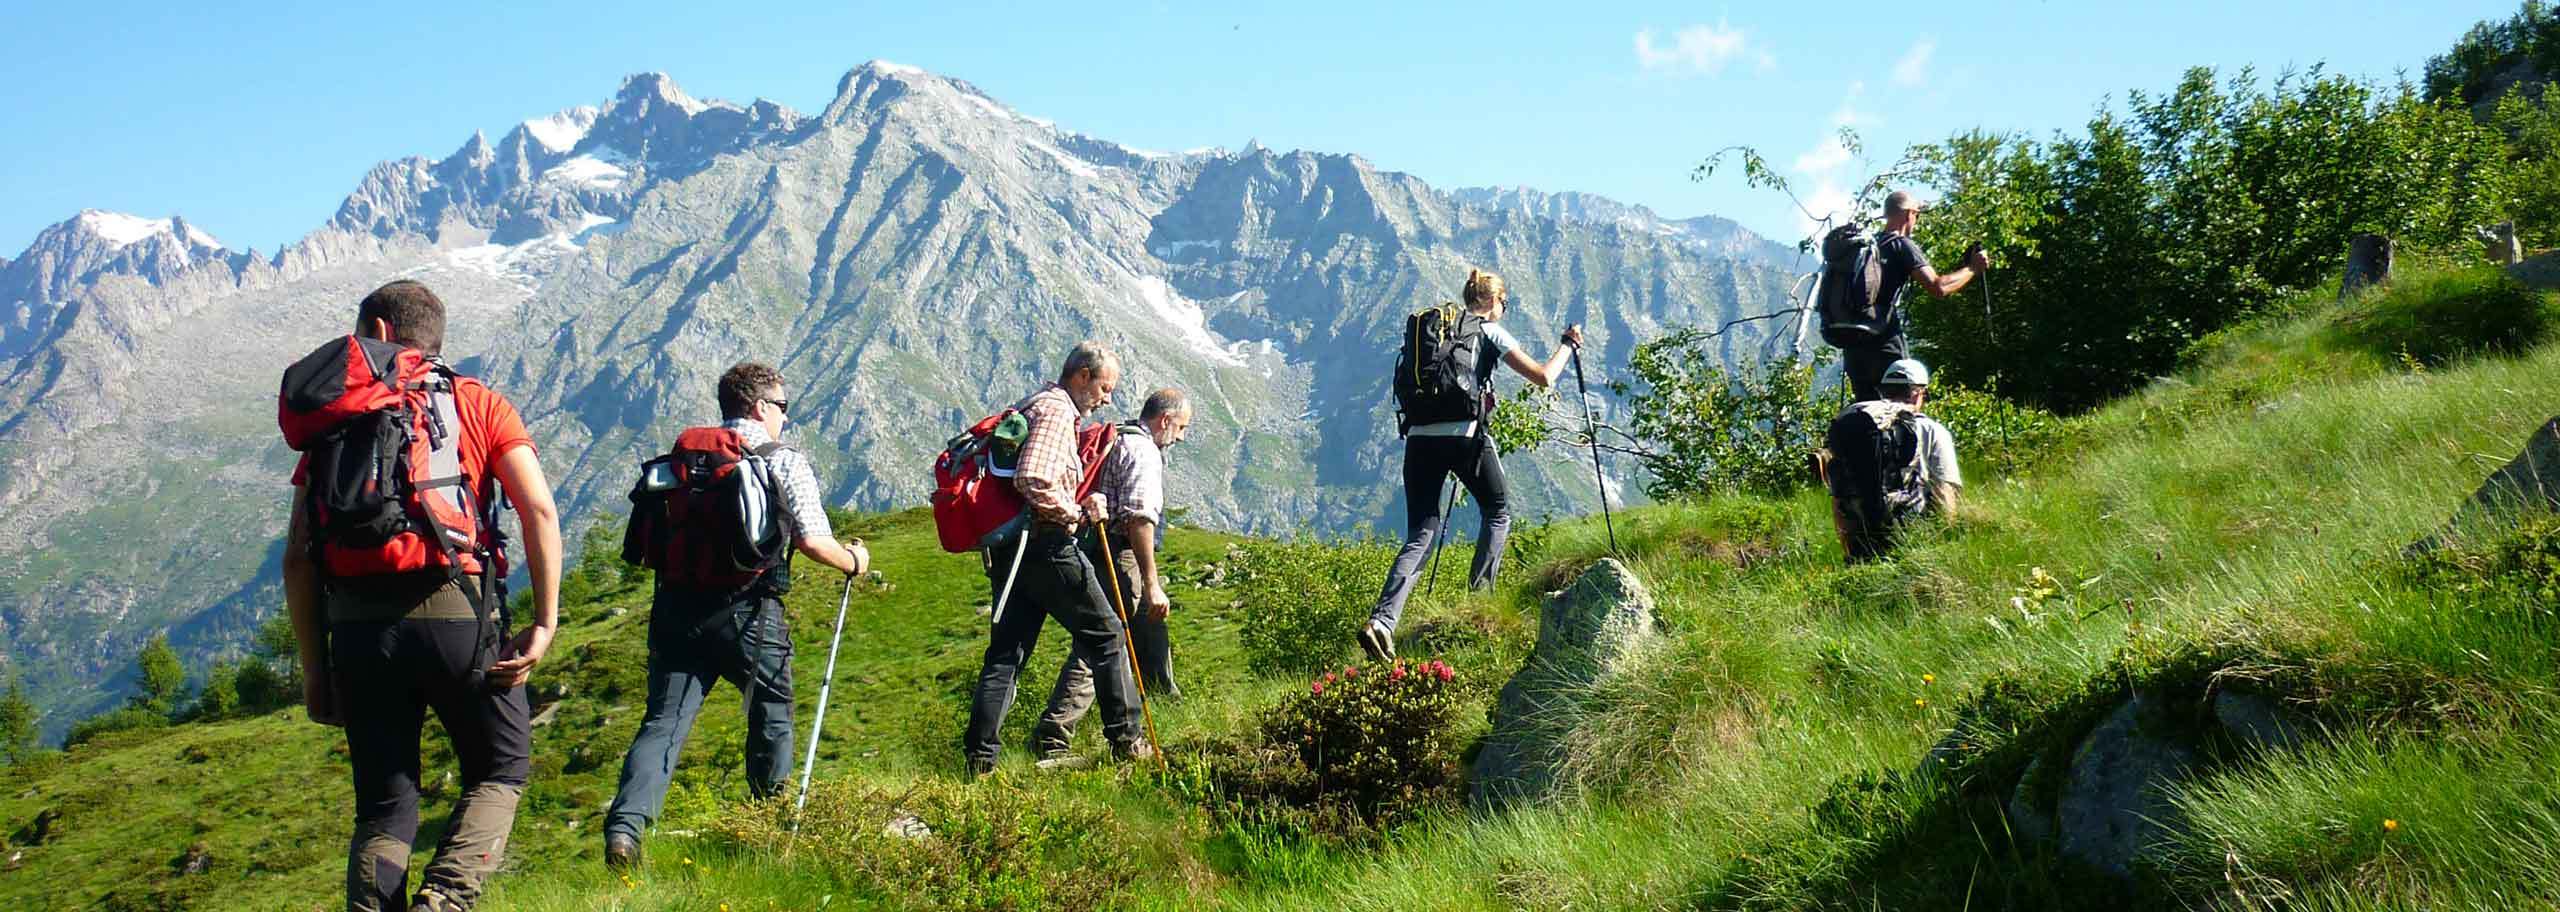 Trekking & Hiking with a Mountain Guide